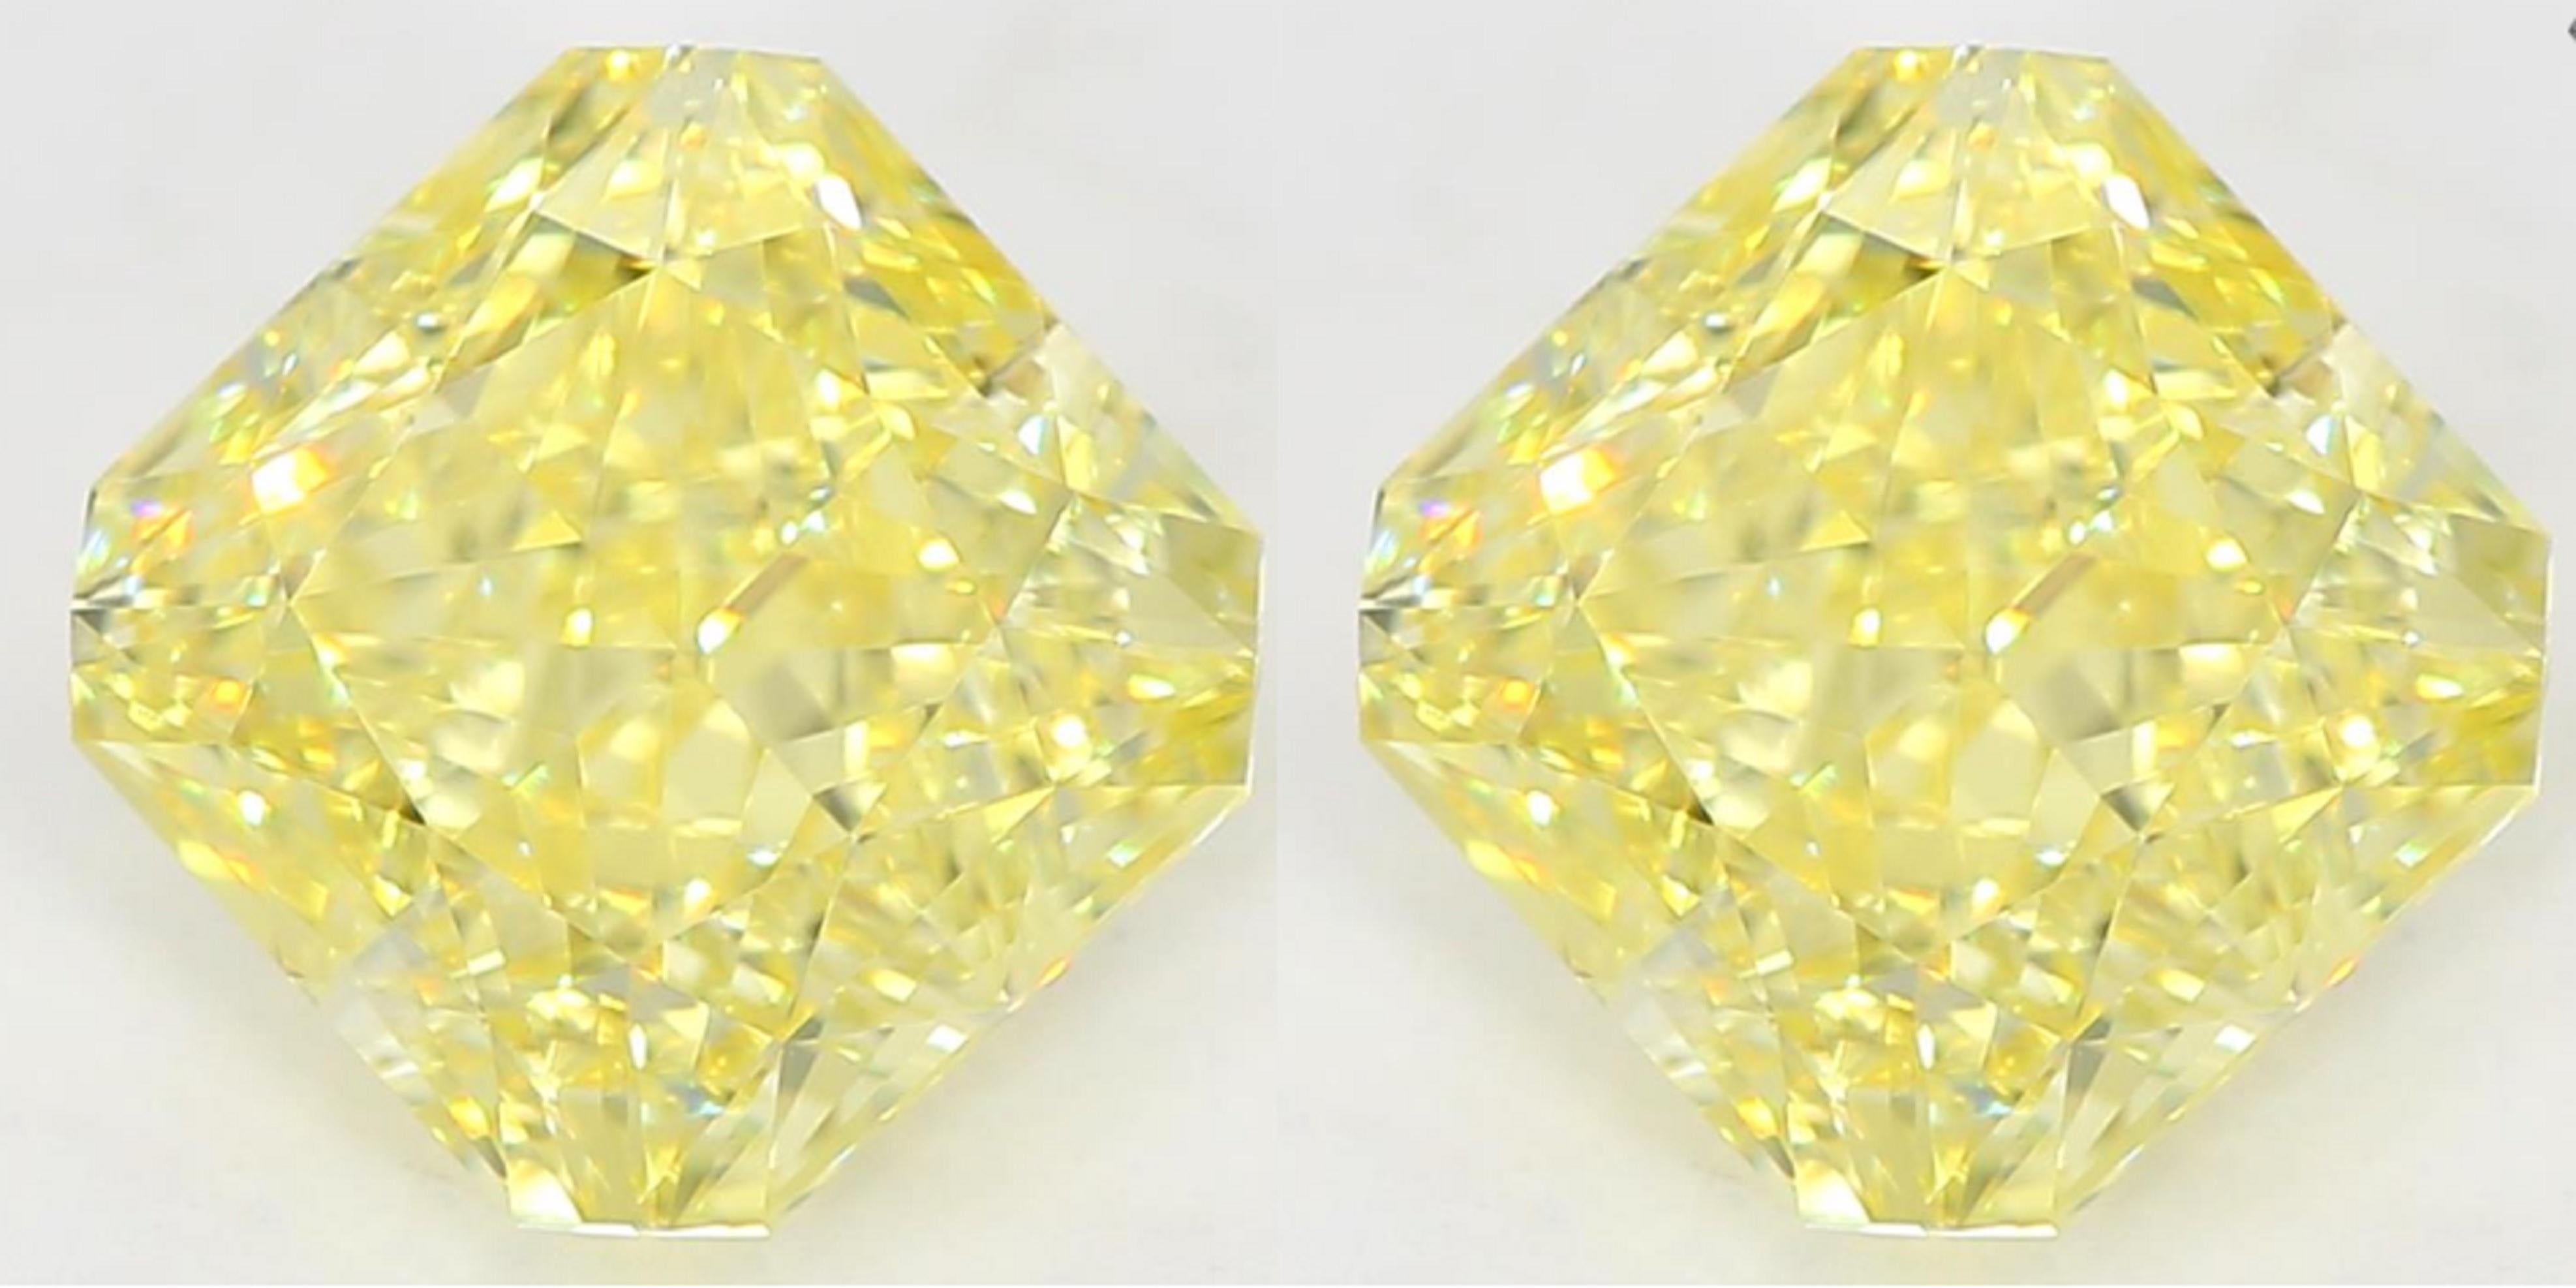 An exquisite pair of GIA certified fancy yellow radiant cut diamond earrings set in solid 18 carats yellow gold